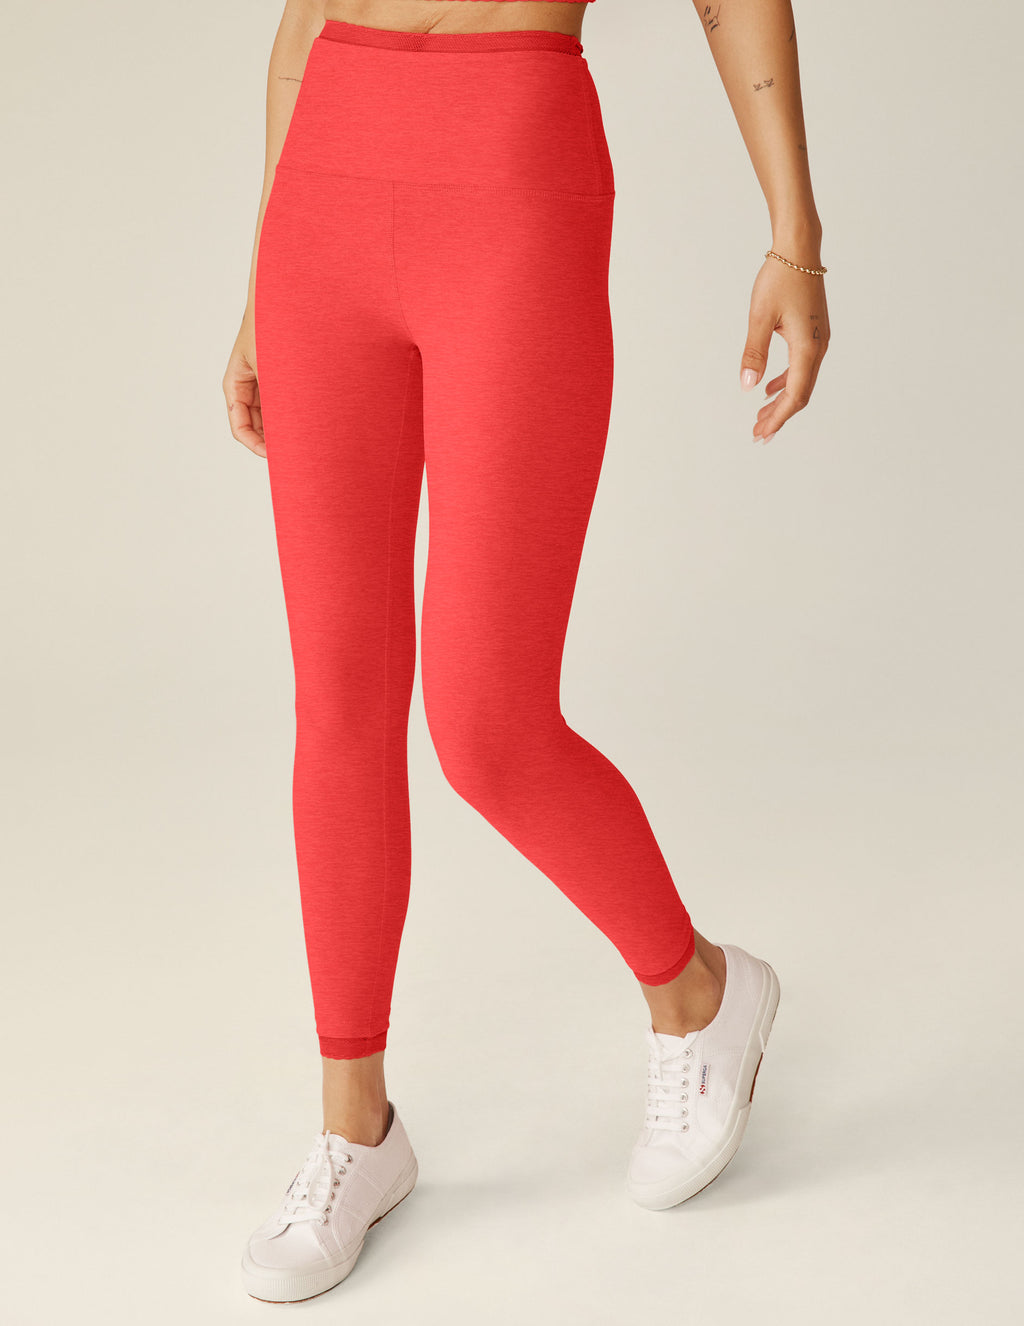 Spacedye Allure High Waisted Midi Legging Featured Image